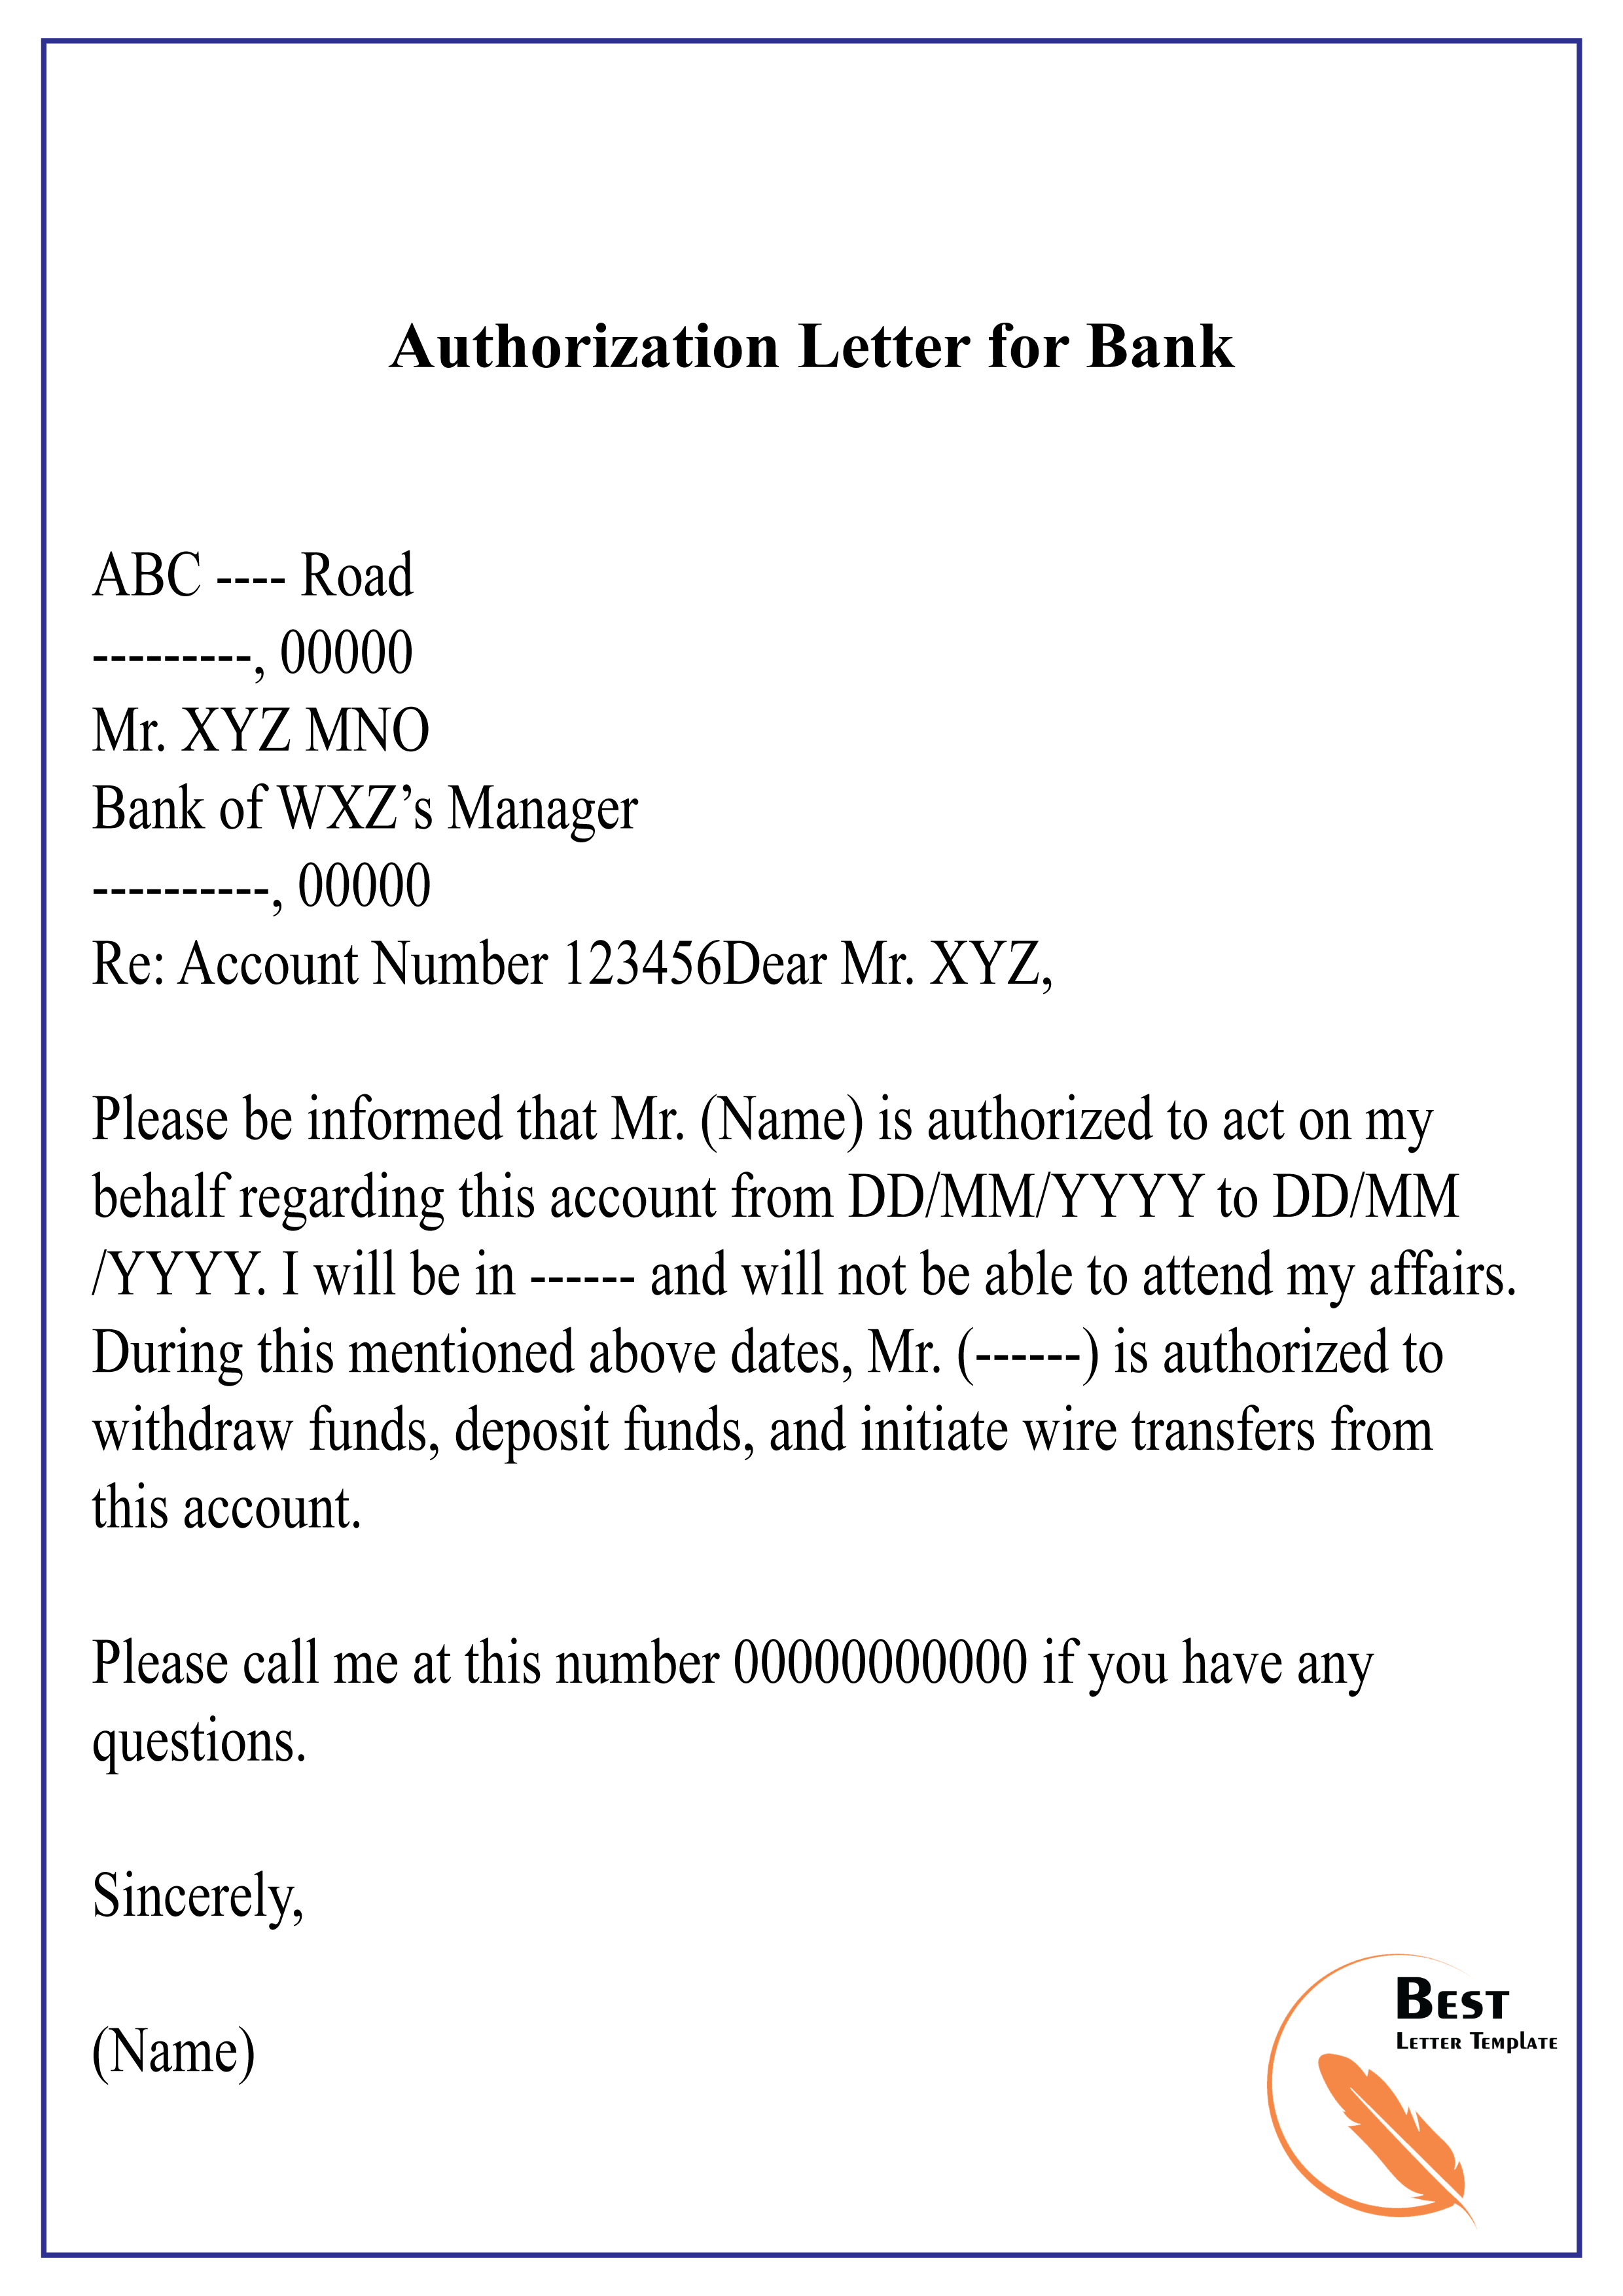 authorization-letter-for-bank-01-best-letter-template